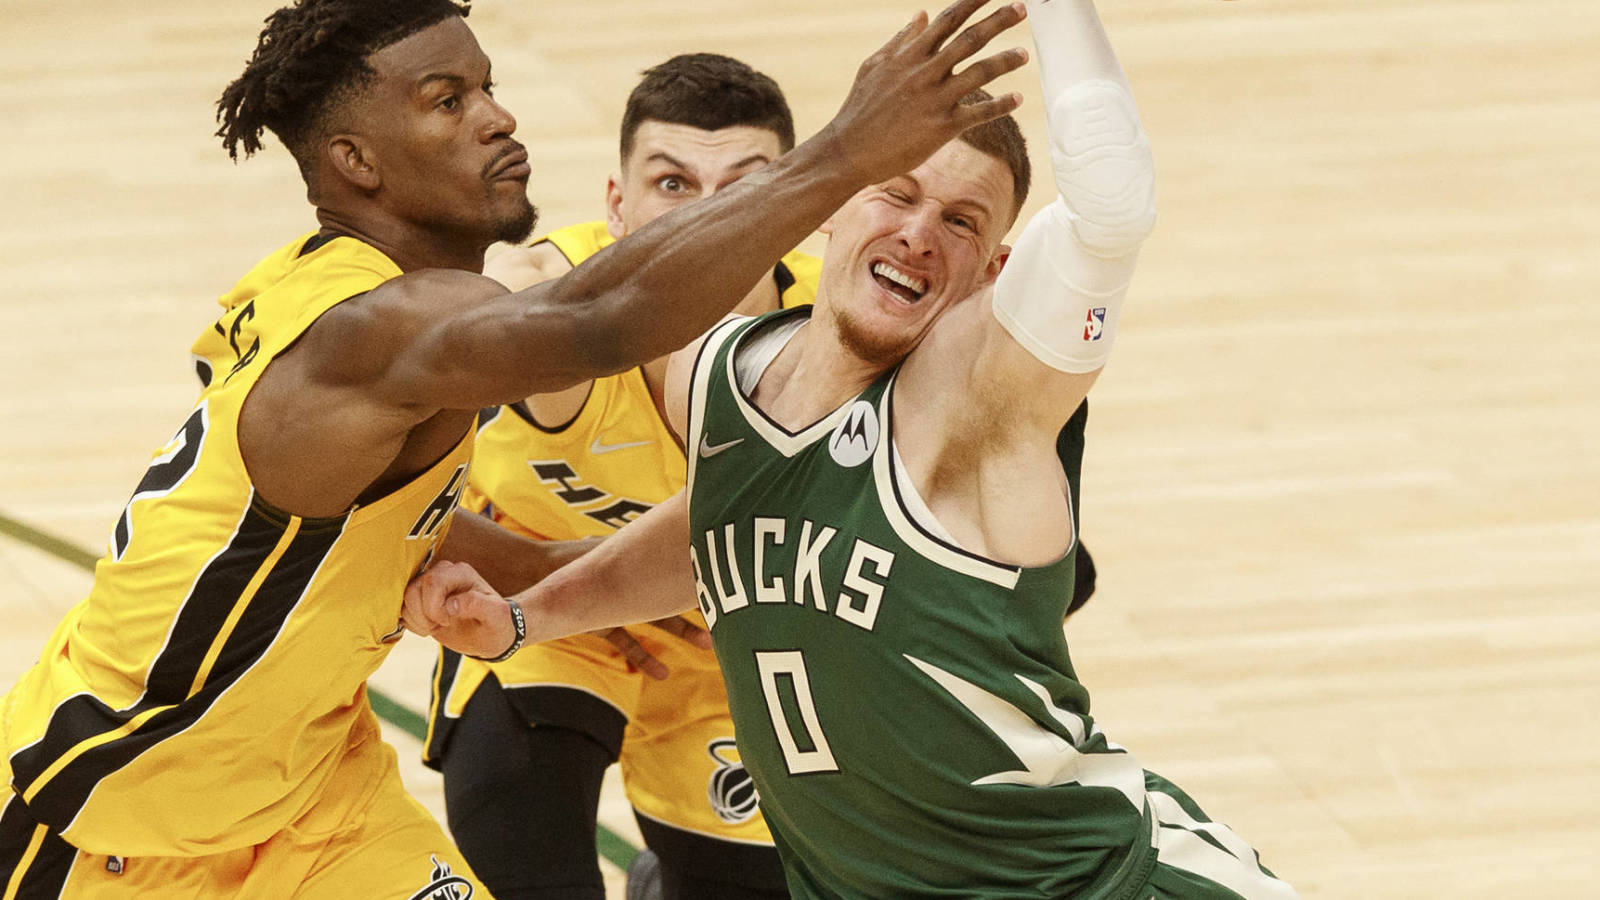 Bucks guard Donte DiVincenzo to miss remainder of playoffs with 'serious' foot injury